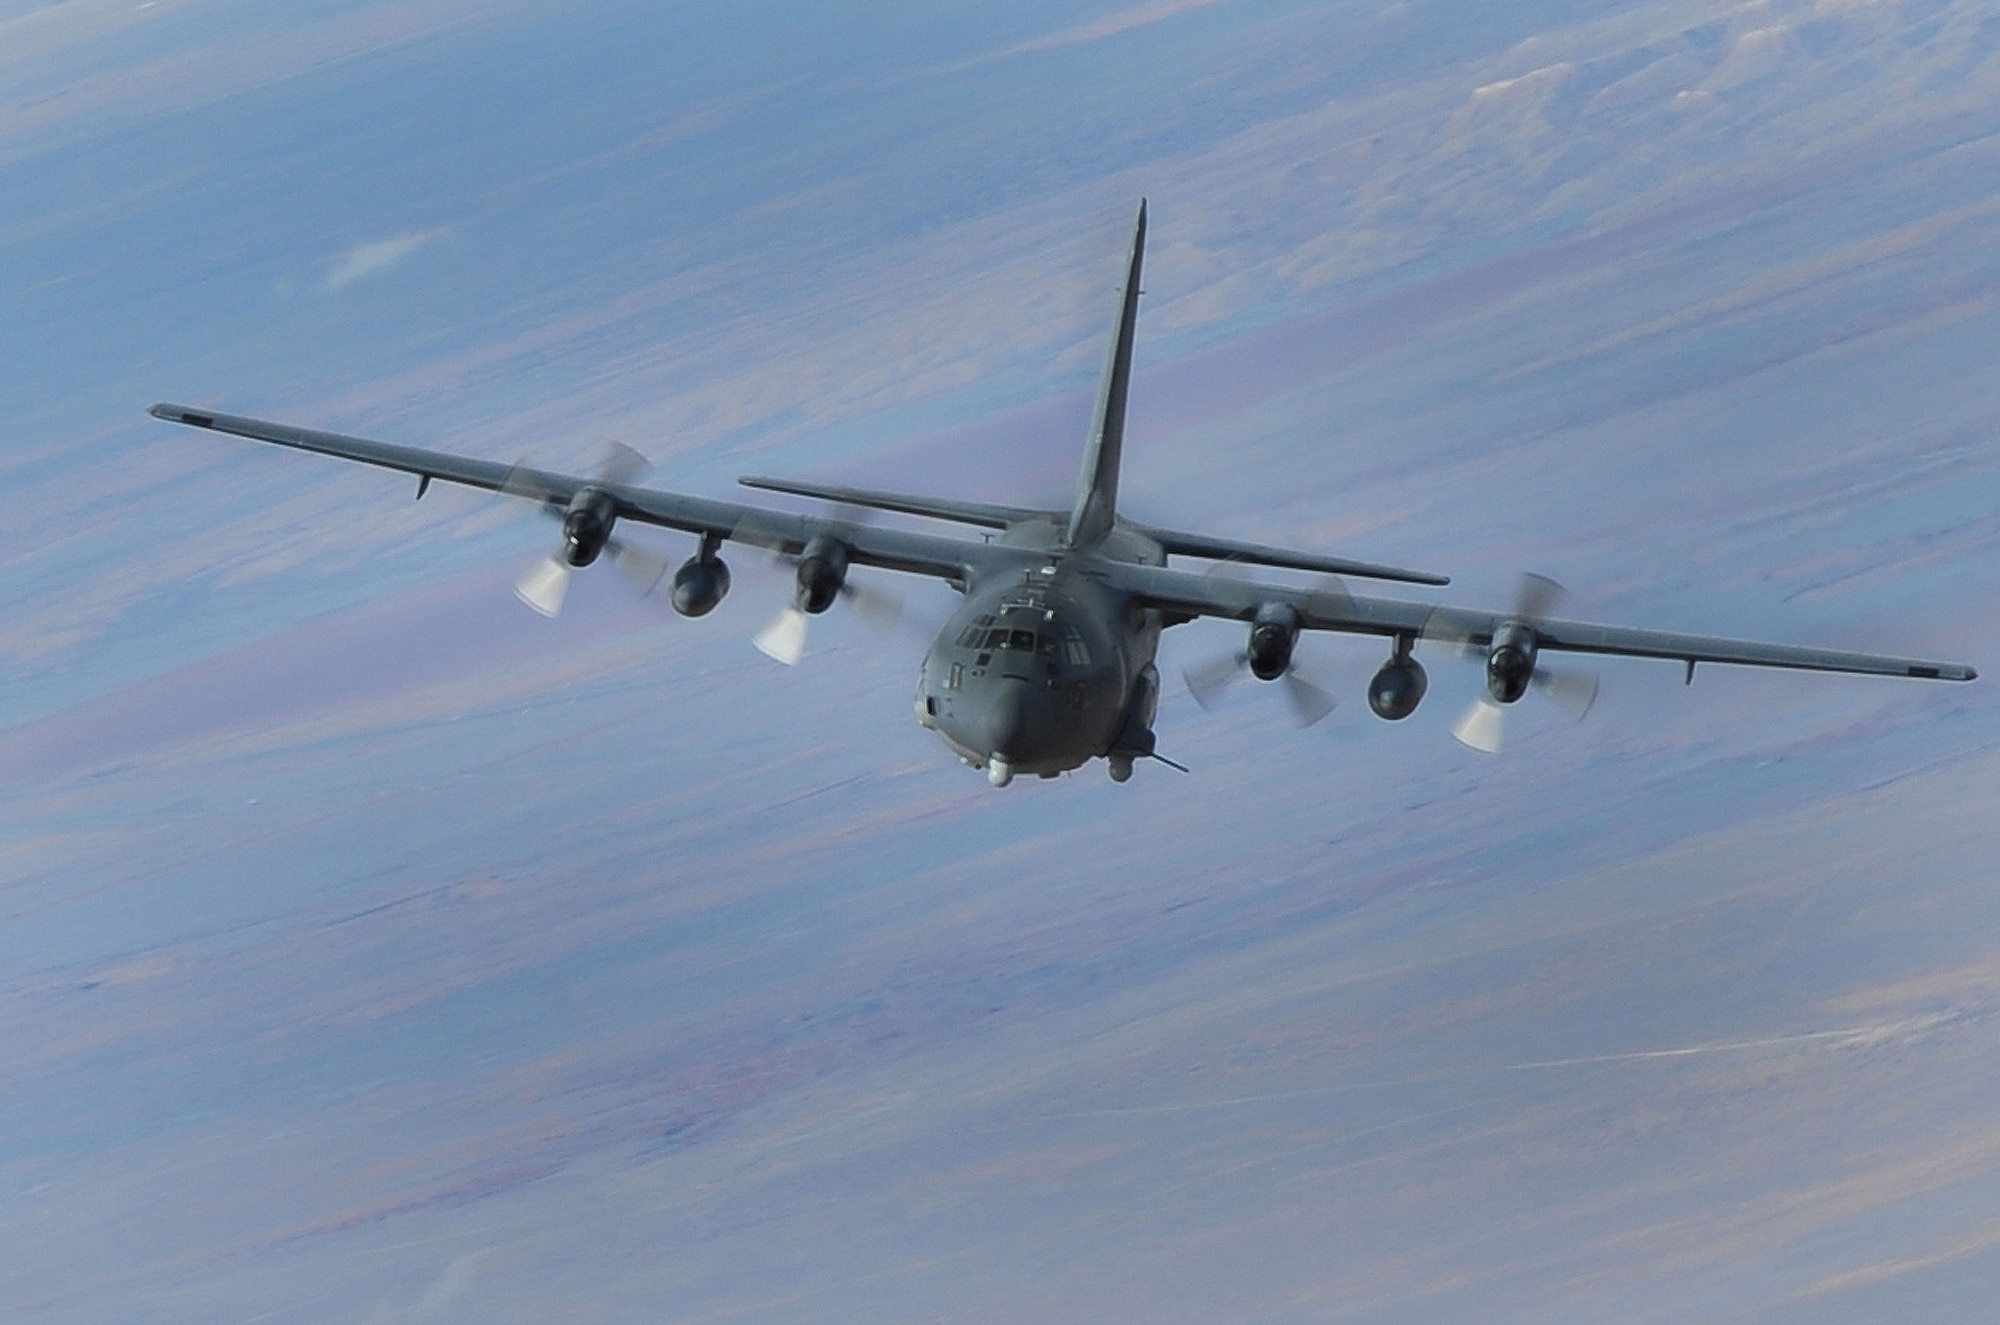 The AC-130W Stinger II primary missions are close air support and air interdiction. The aircraft is a highly modified C-130H featuring improved navigation, threat detection, countermeasures, and communication suites. All AC-130W aircraft are modified with a precision strike package to perform the gunship mission. (U.S. Air Force photo)